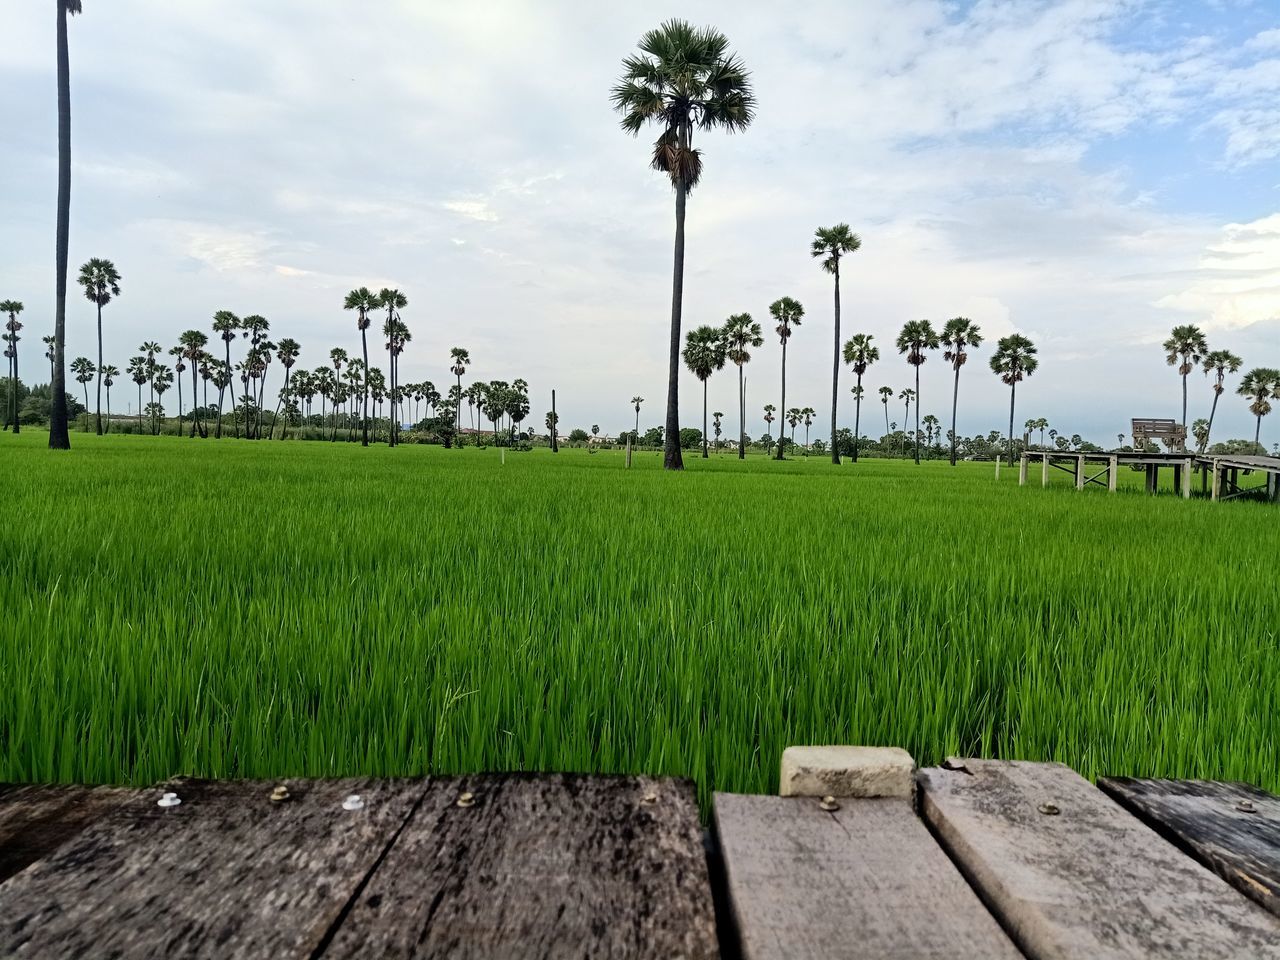 plant, paddy field, sky, agriculture, palm tree, tropical climate, tree, field, grass, landscape, nature, cloud, land, environment, rural area, rural scene, rice paddy, green, rice, crop, beauty in nature, growth, coconut palm tree, outdoors, no people, scenics - nature, farm, tranquility, day, wood, water, environmental conservation, food and drink, tropical tree, tranquil scene, food, social issues, wheatgrass, cereal plant